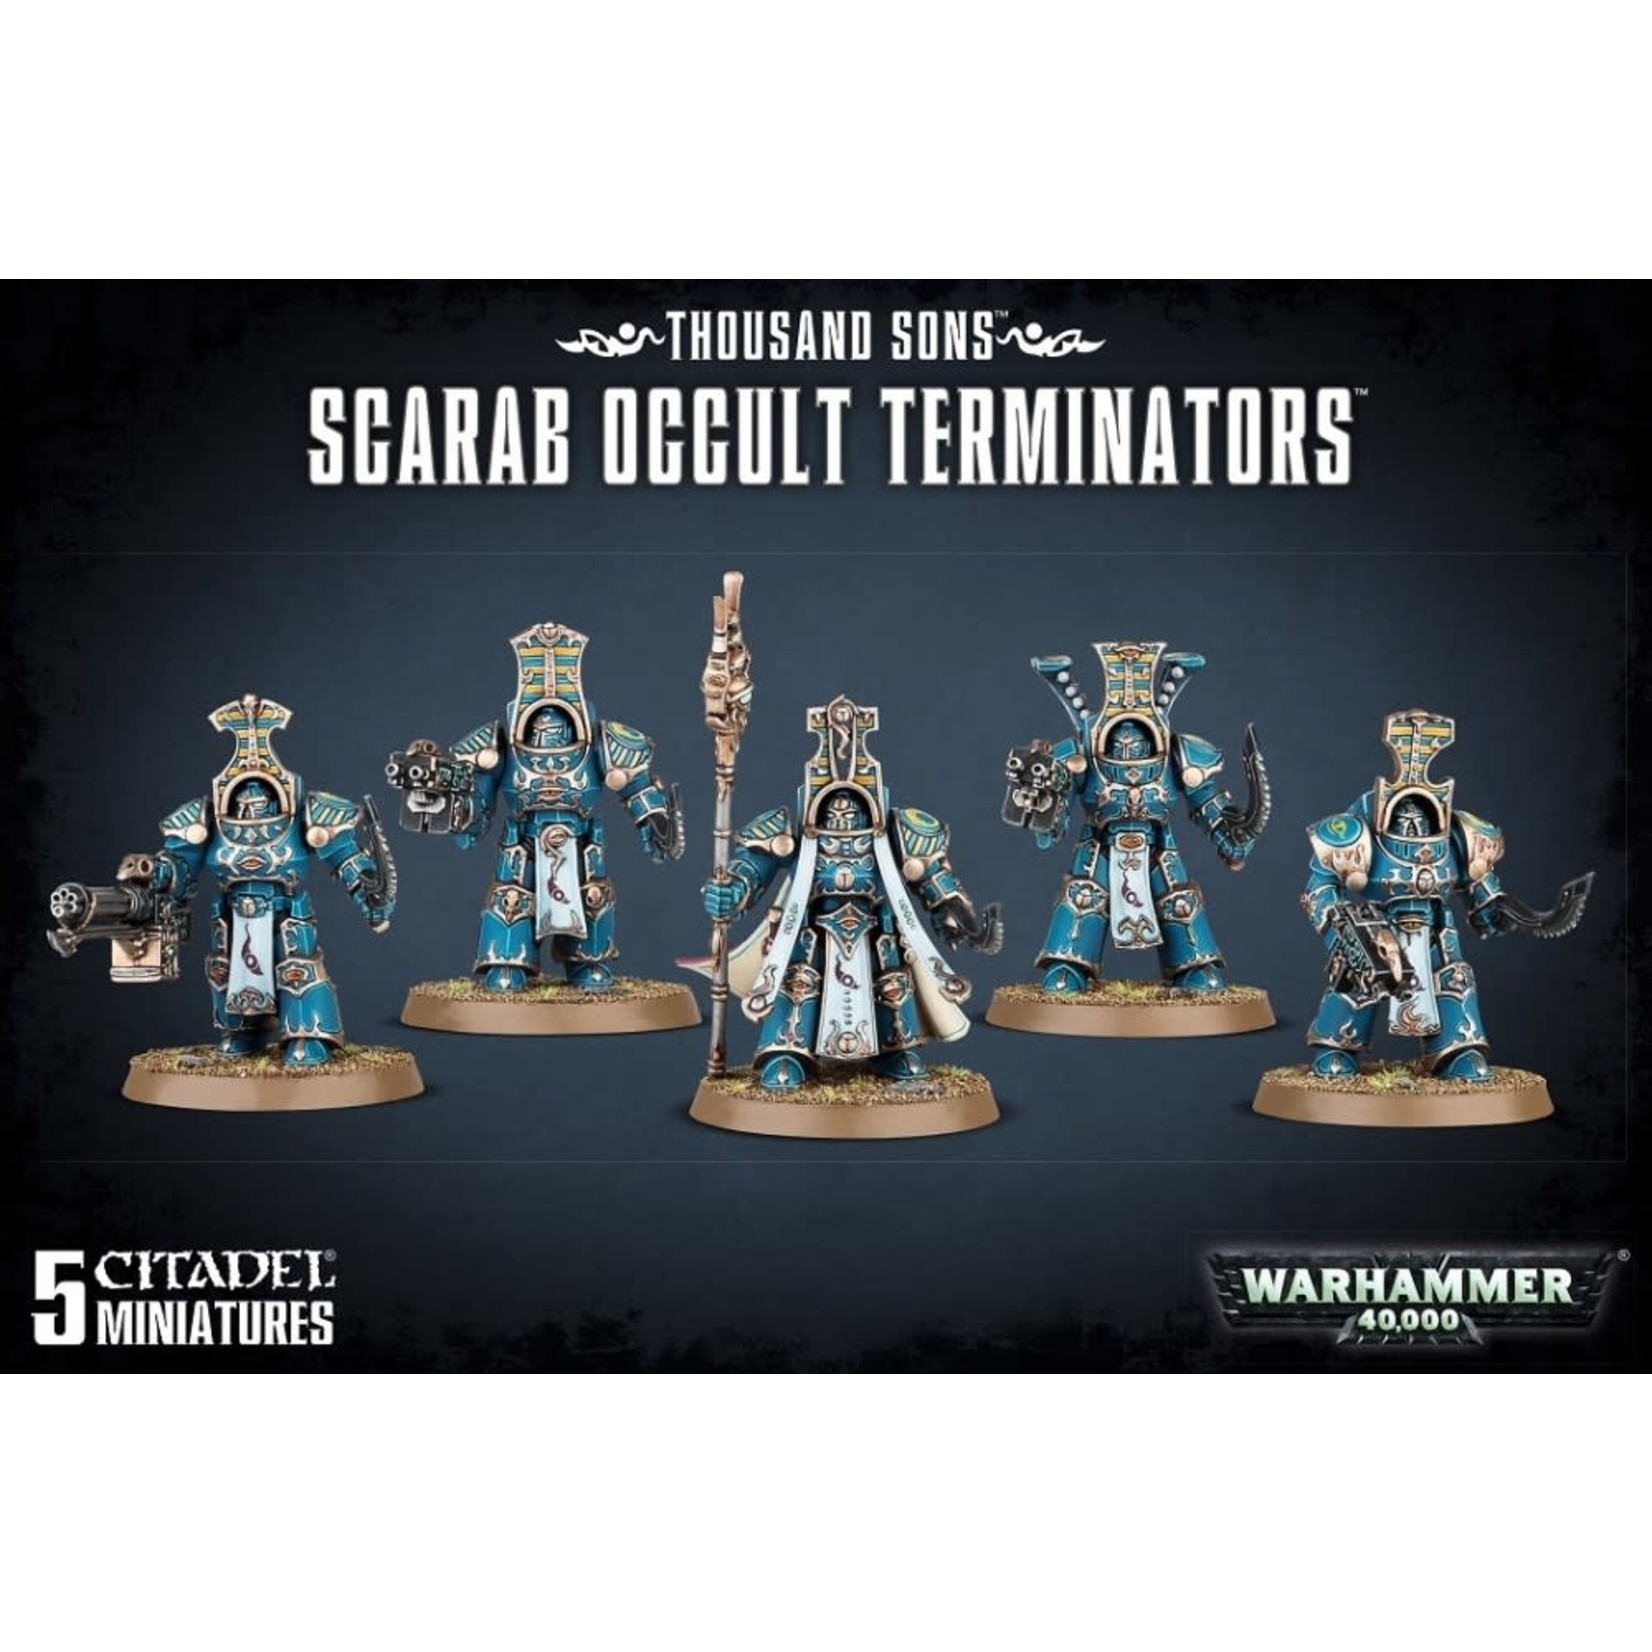 Thousand Sons Thousand Sons Scarab Occult Terminators